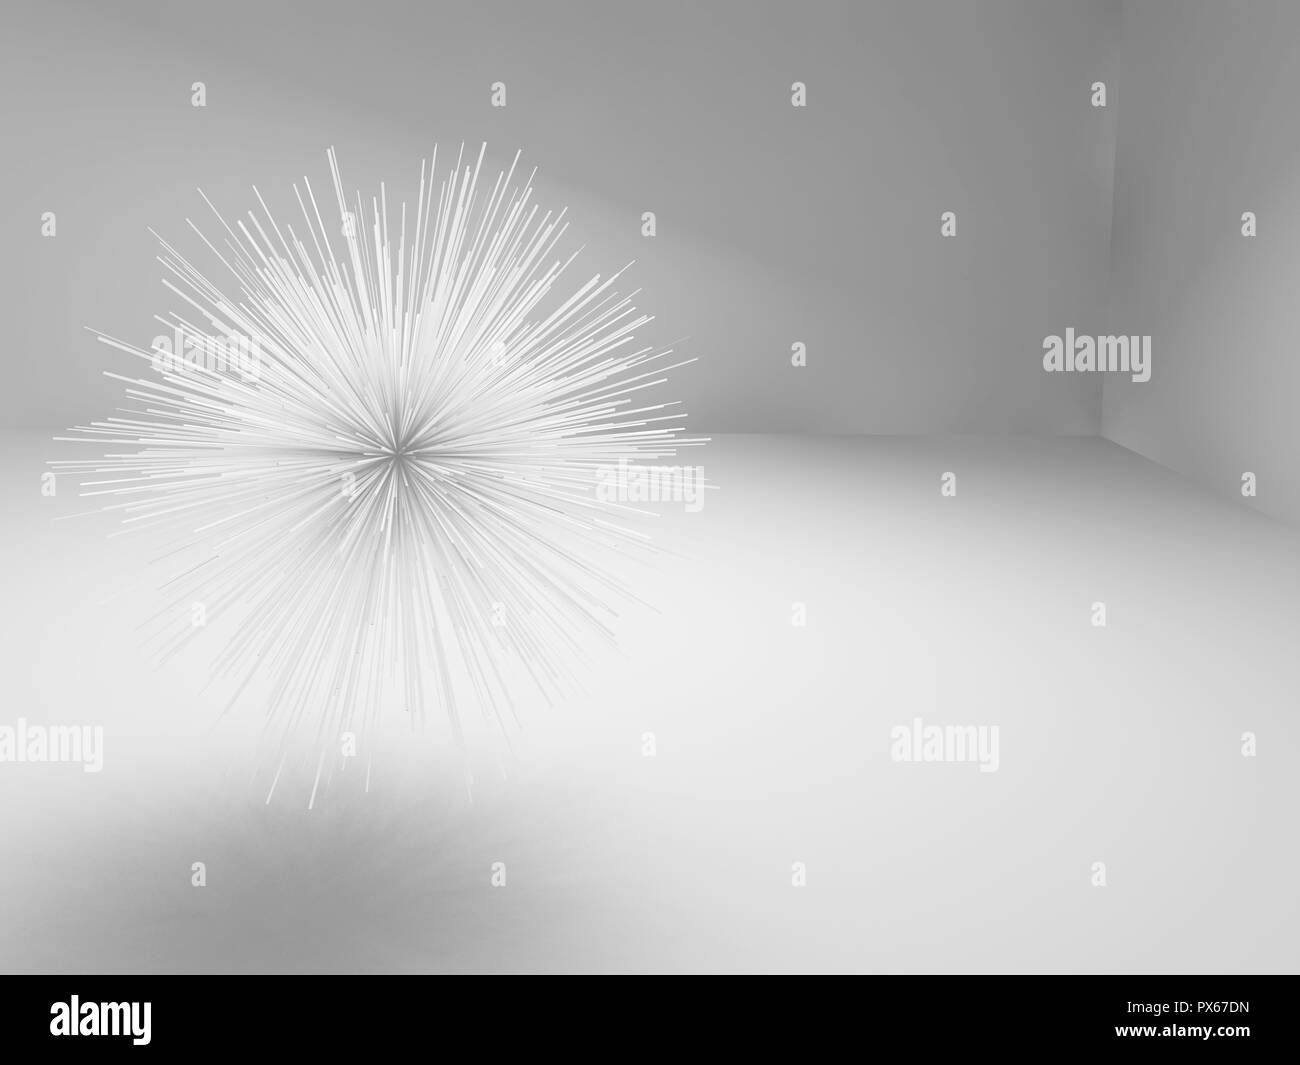 Abstract sharp star shaped white object flying in empty room, 3d illustration Stock Photo